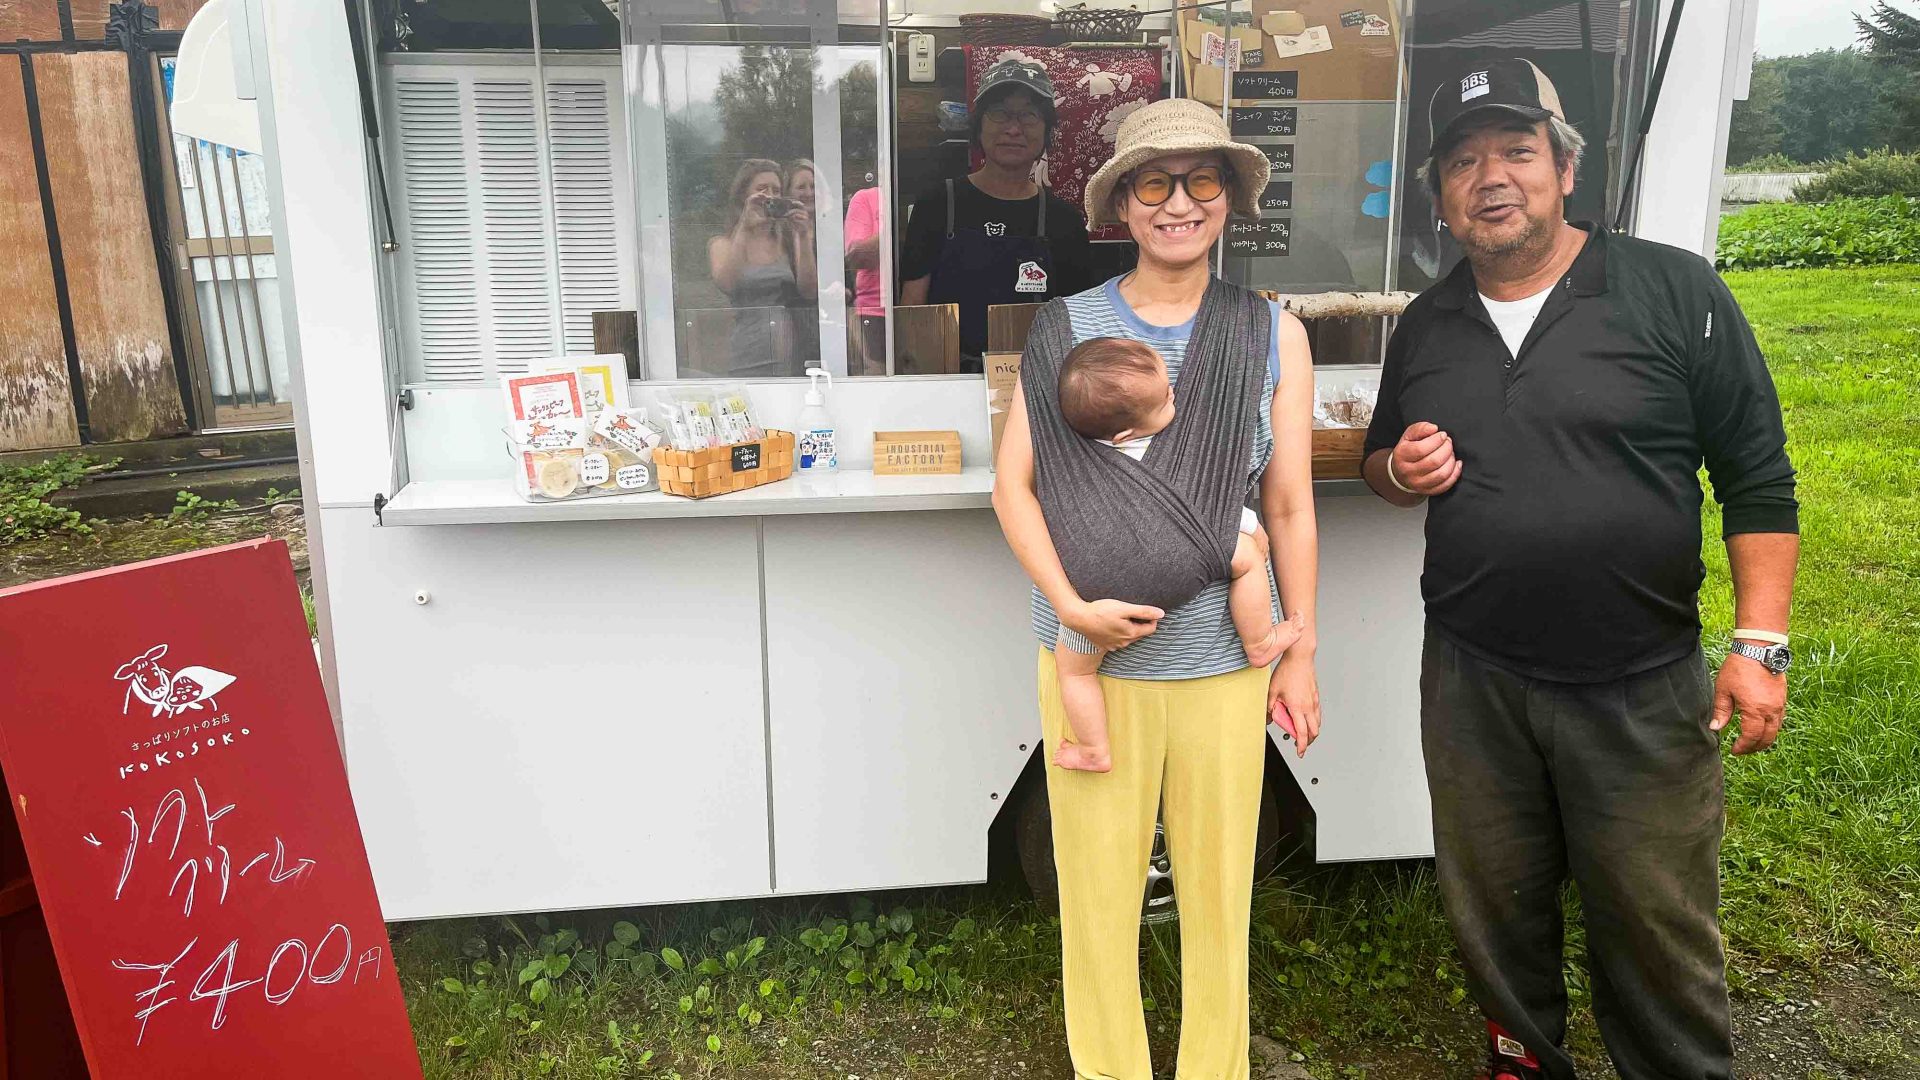 A woman, man and baby stand in front of a food truck.